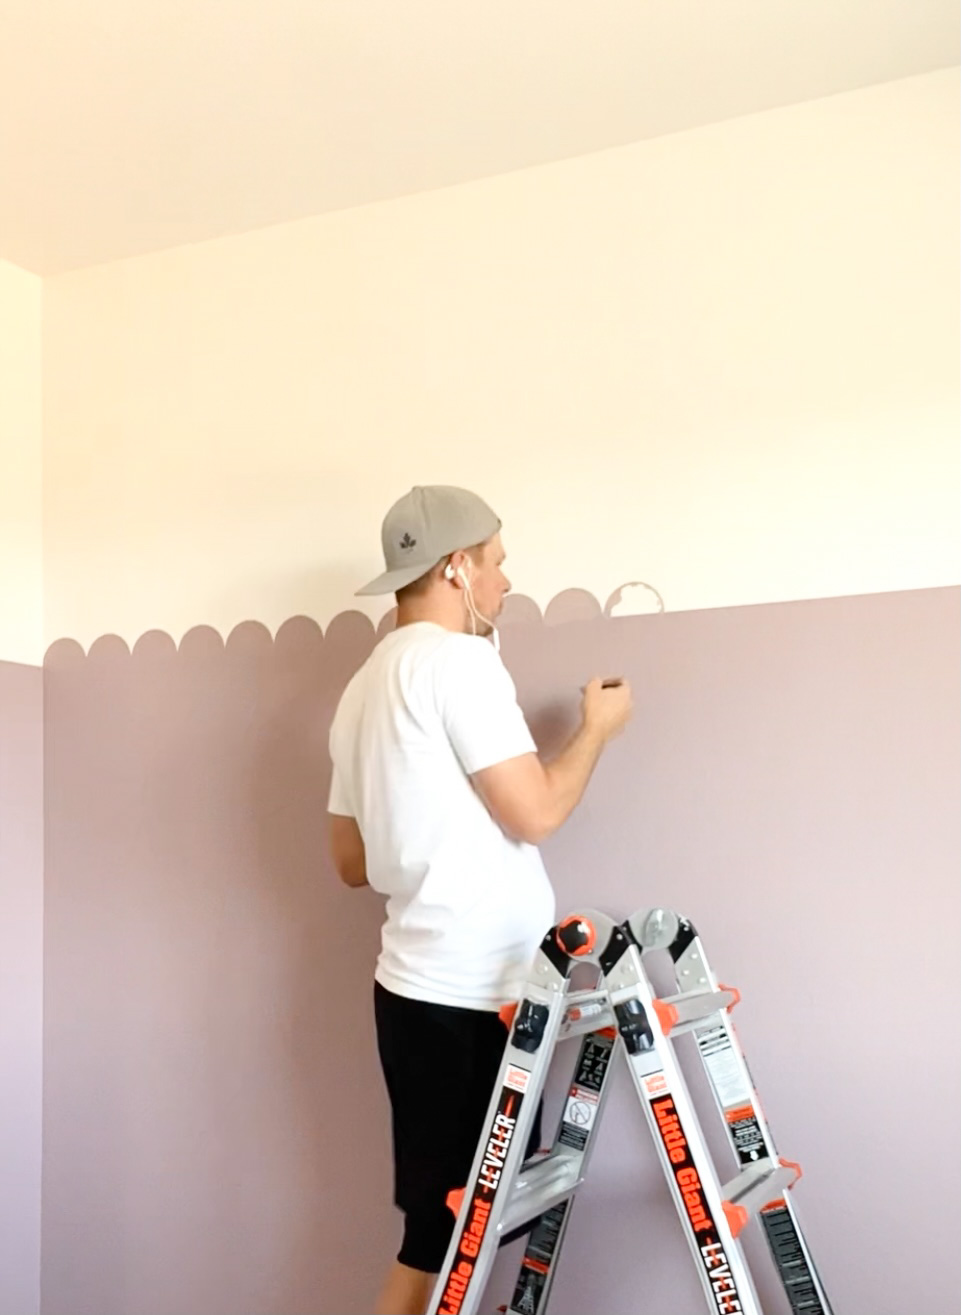 How To Paint a Scalloped Edge Wall - Step by Step Guide